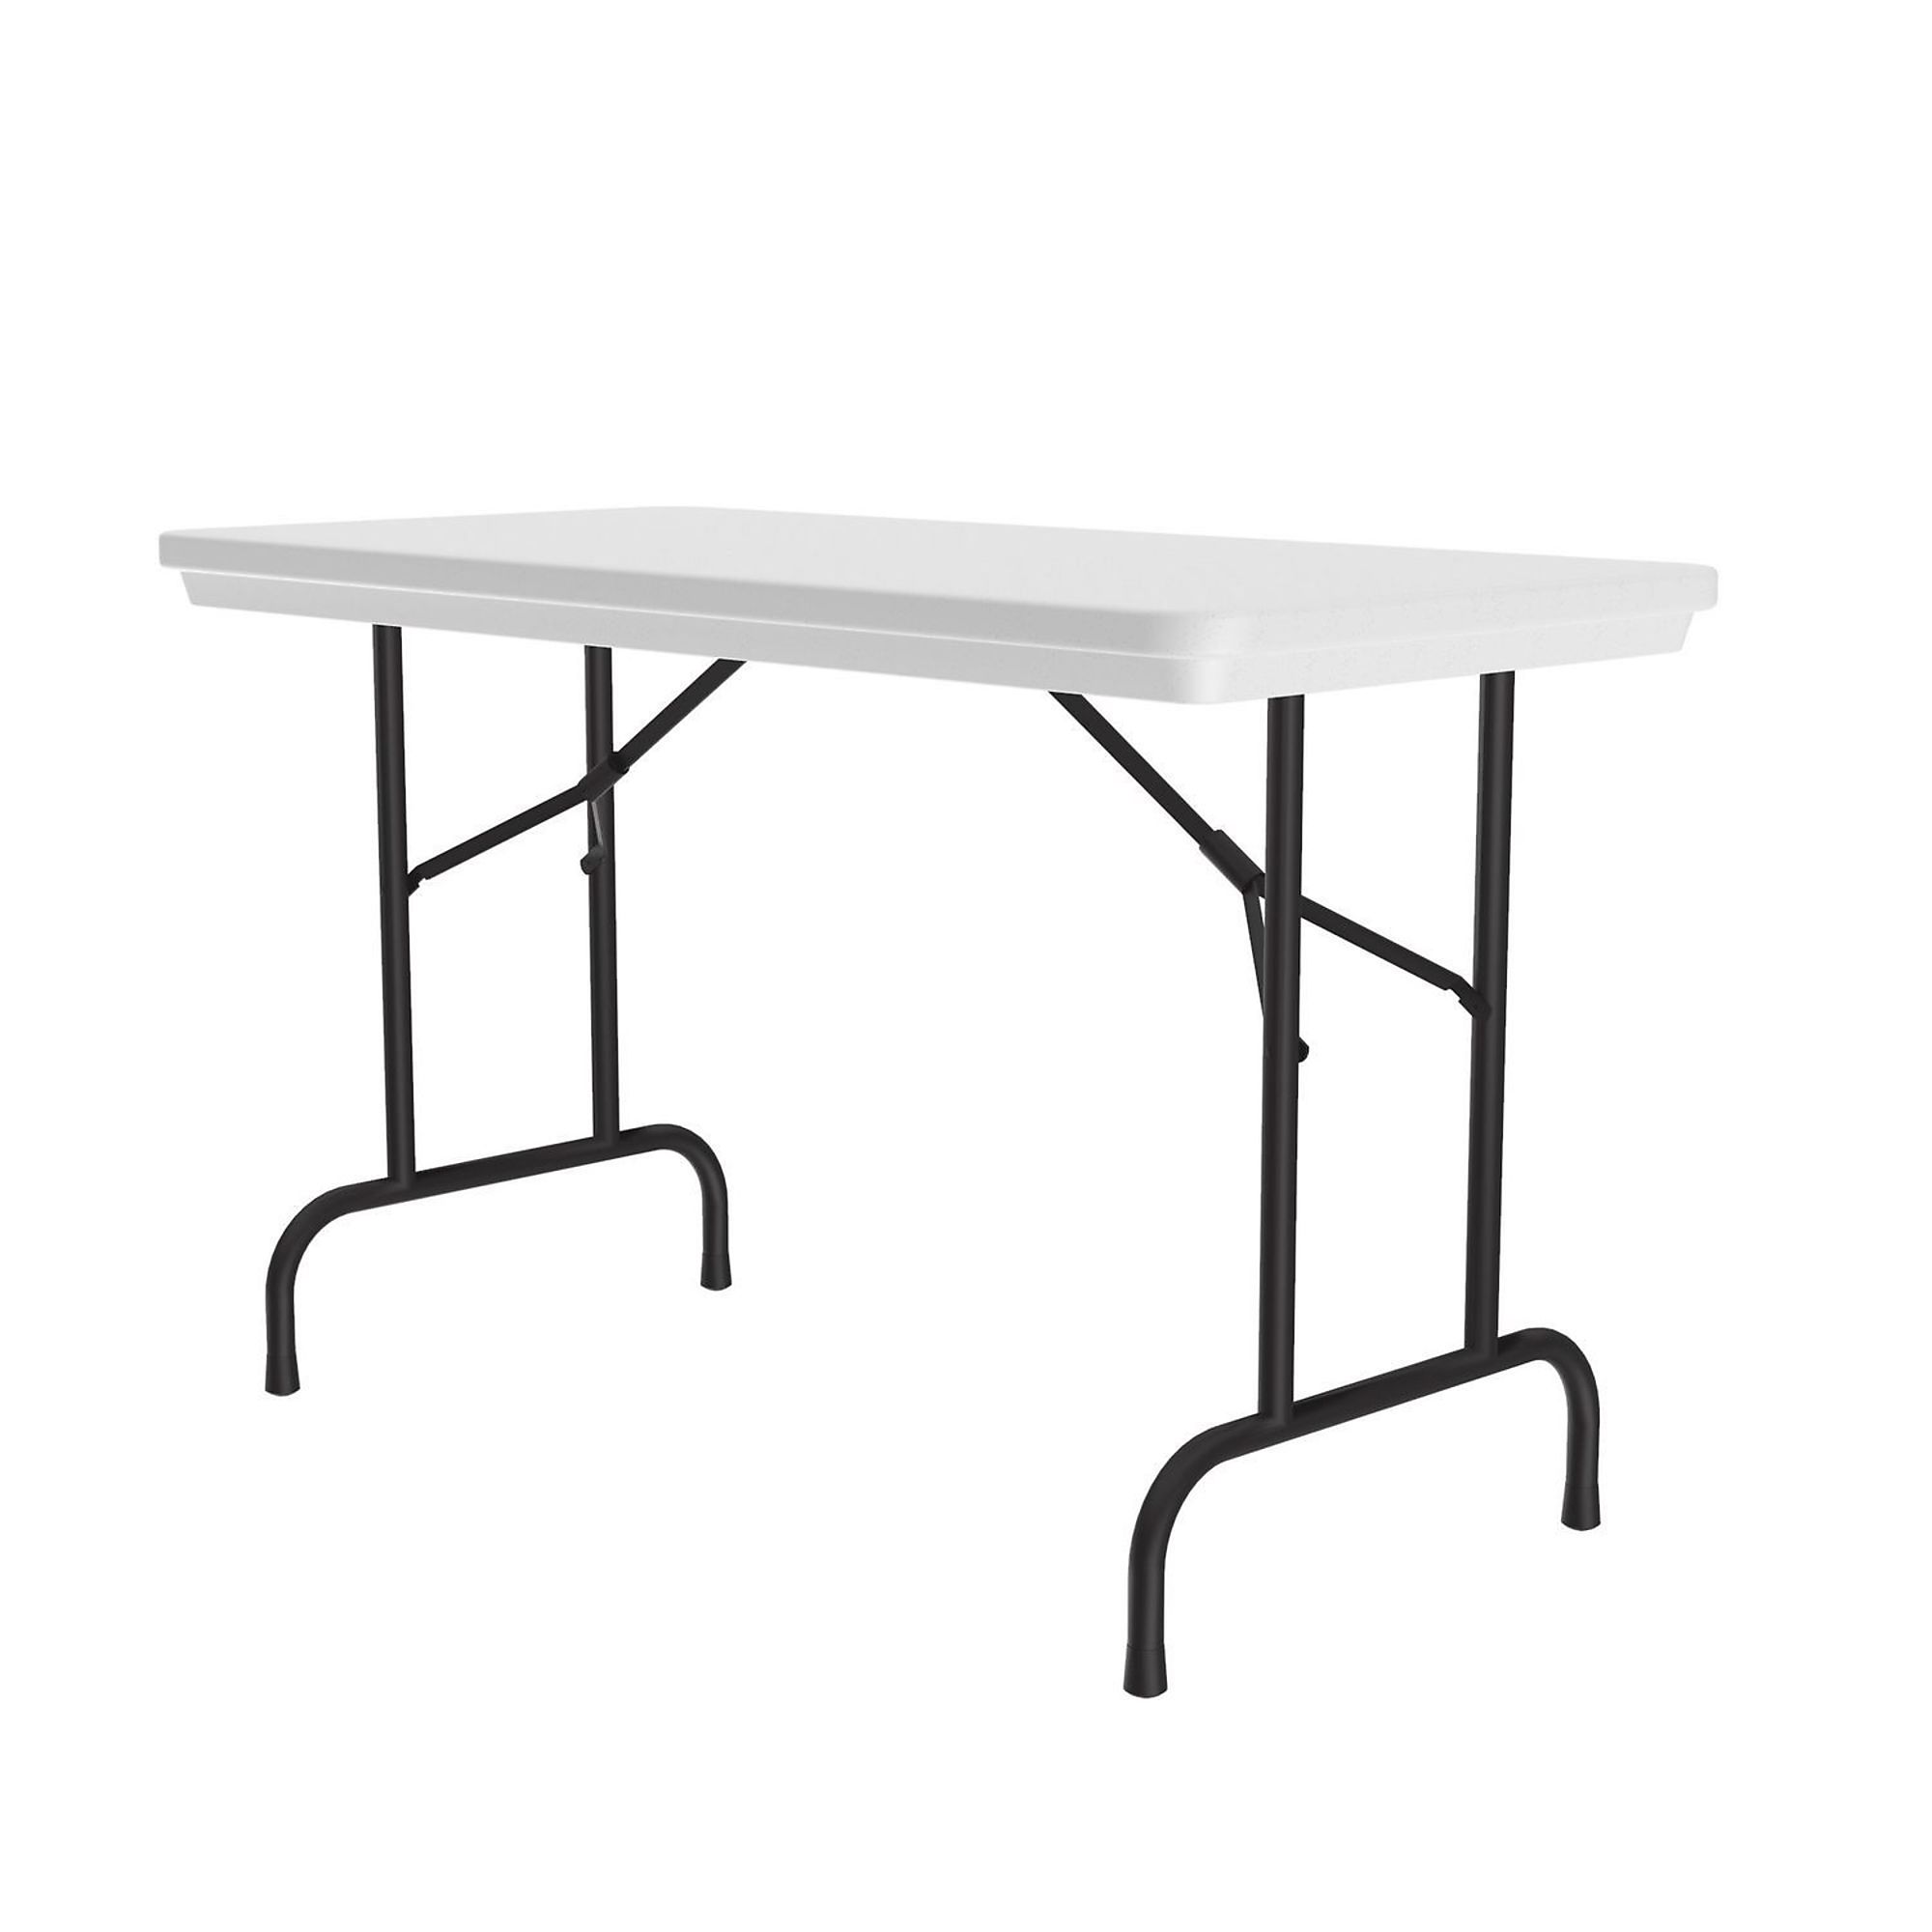 Correll, Plastic Folding Table, Gray Granite Top, 24x48, Height 29 in, Width 24 in, Length 48 in, Model R2448-23